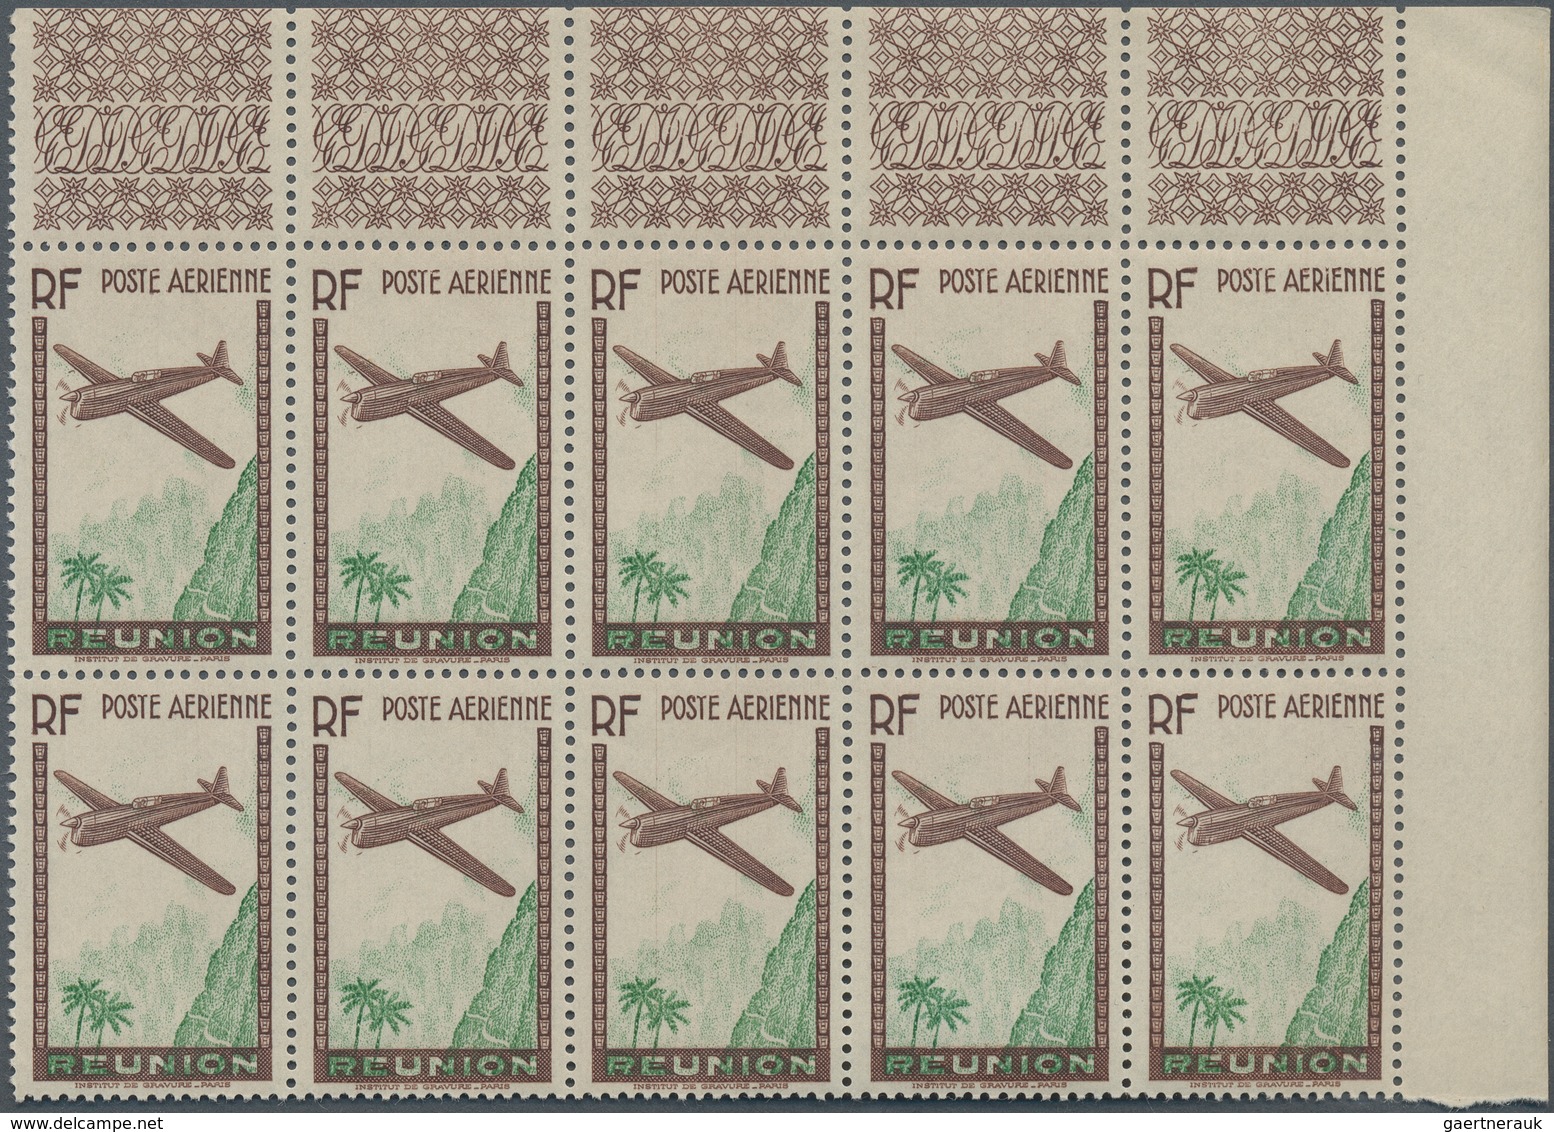 Reunion: 1938, Airmail Issue ‚airplane Over Mountains‘ (12.65fr.) Brown/green With MISSING DENOMINAT - Nuevos